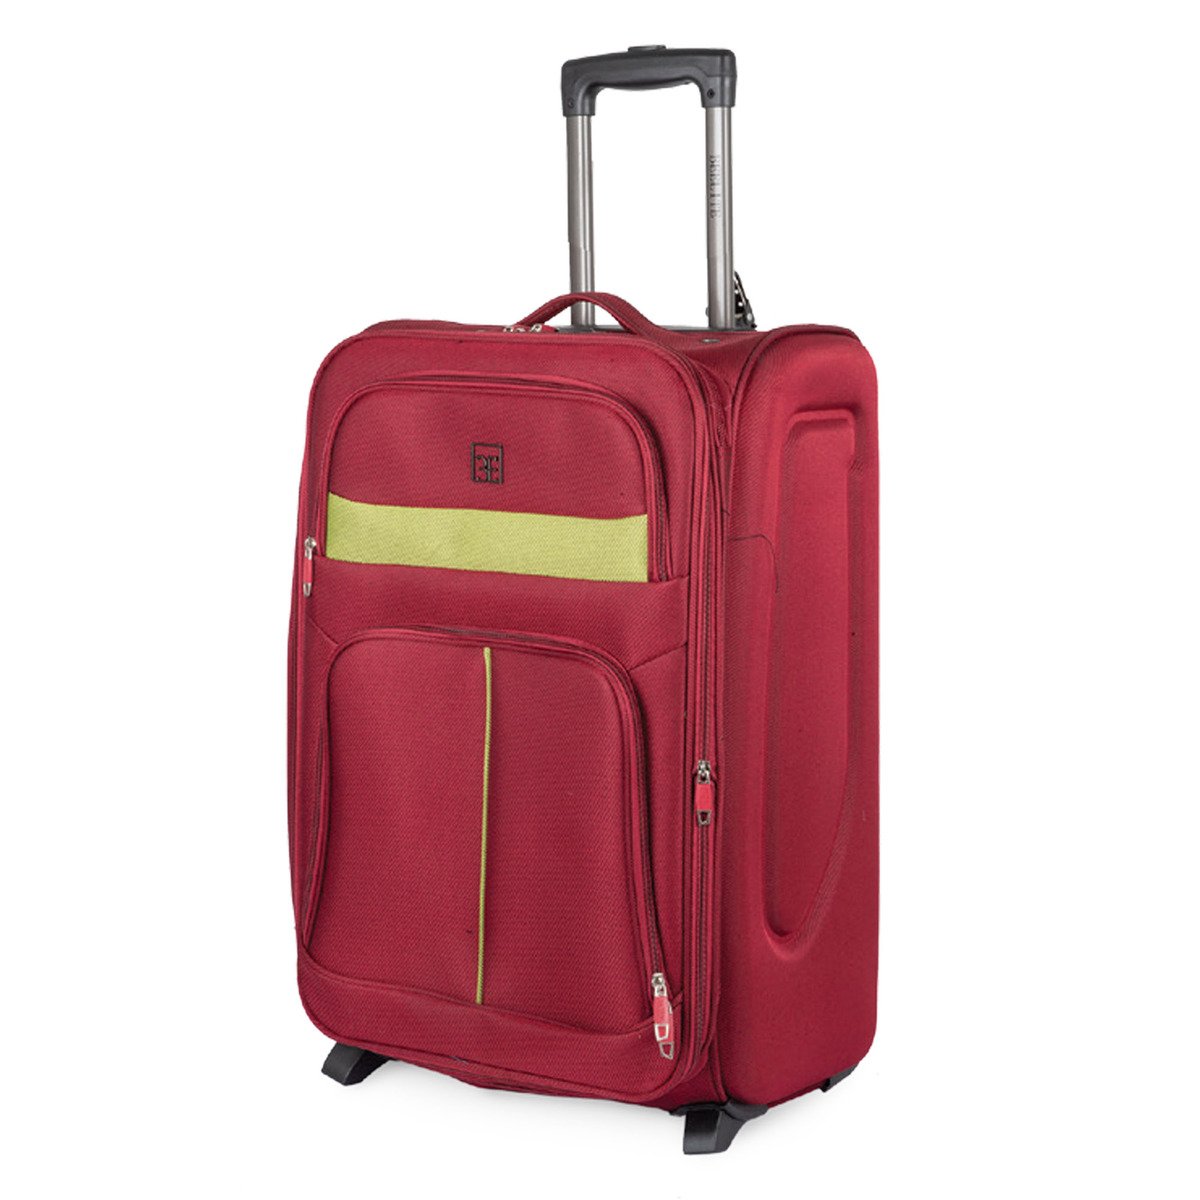 Beelite Soft Trolley FT0089 28inch Assorted Colors